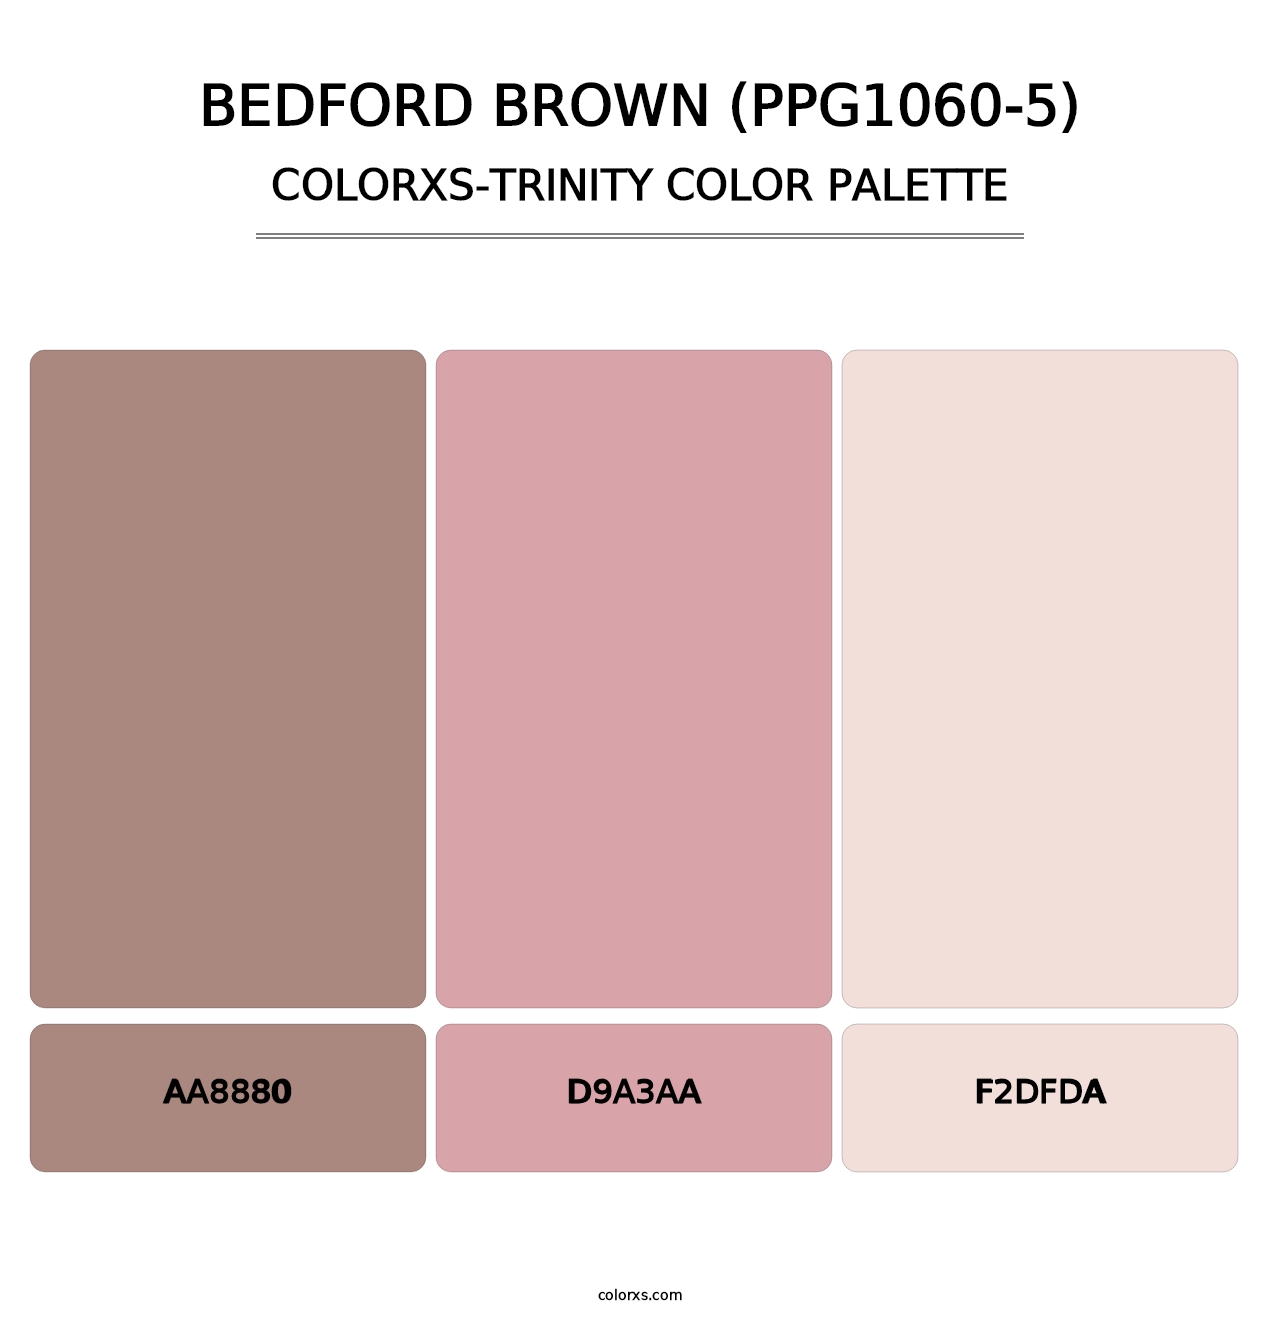 Bedford Brown (PPG1060-5) - Colorxs Trinity Palette